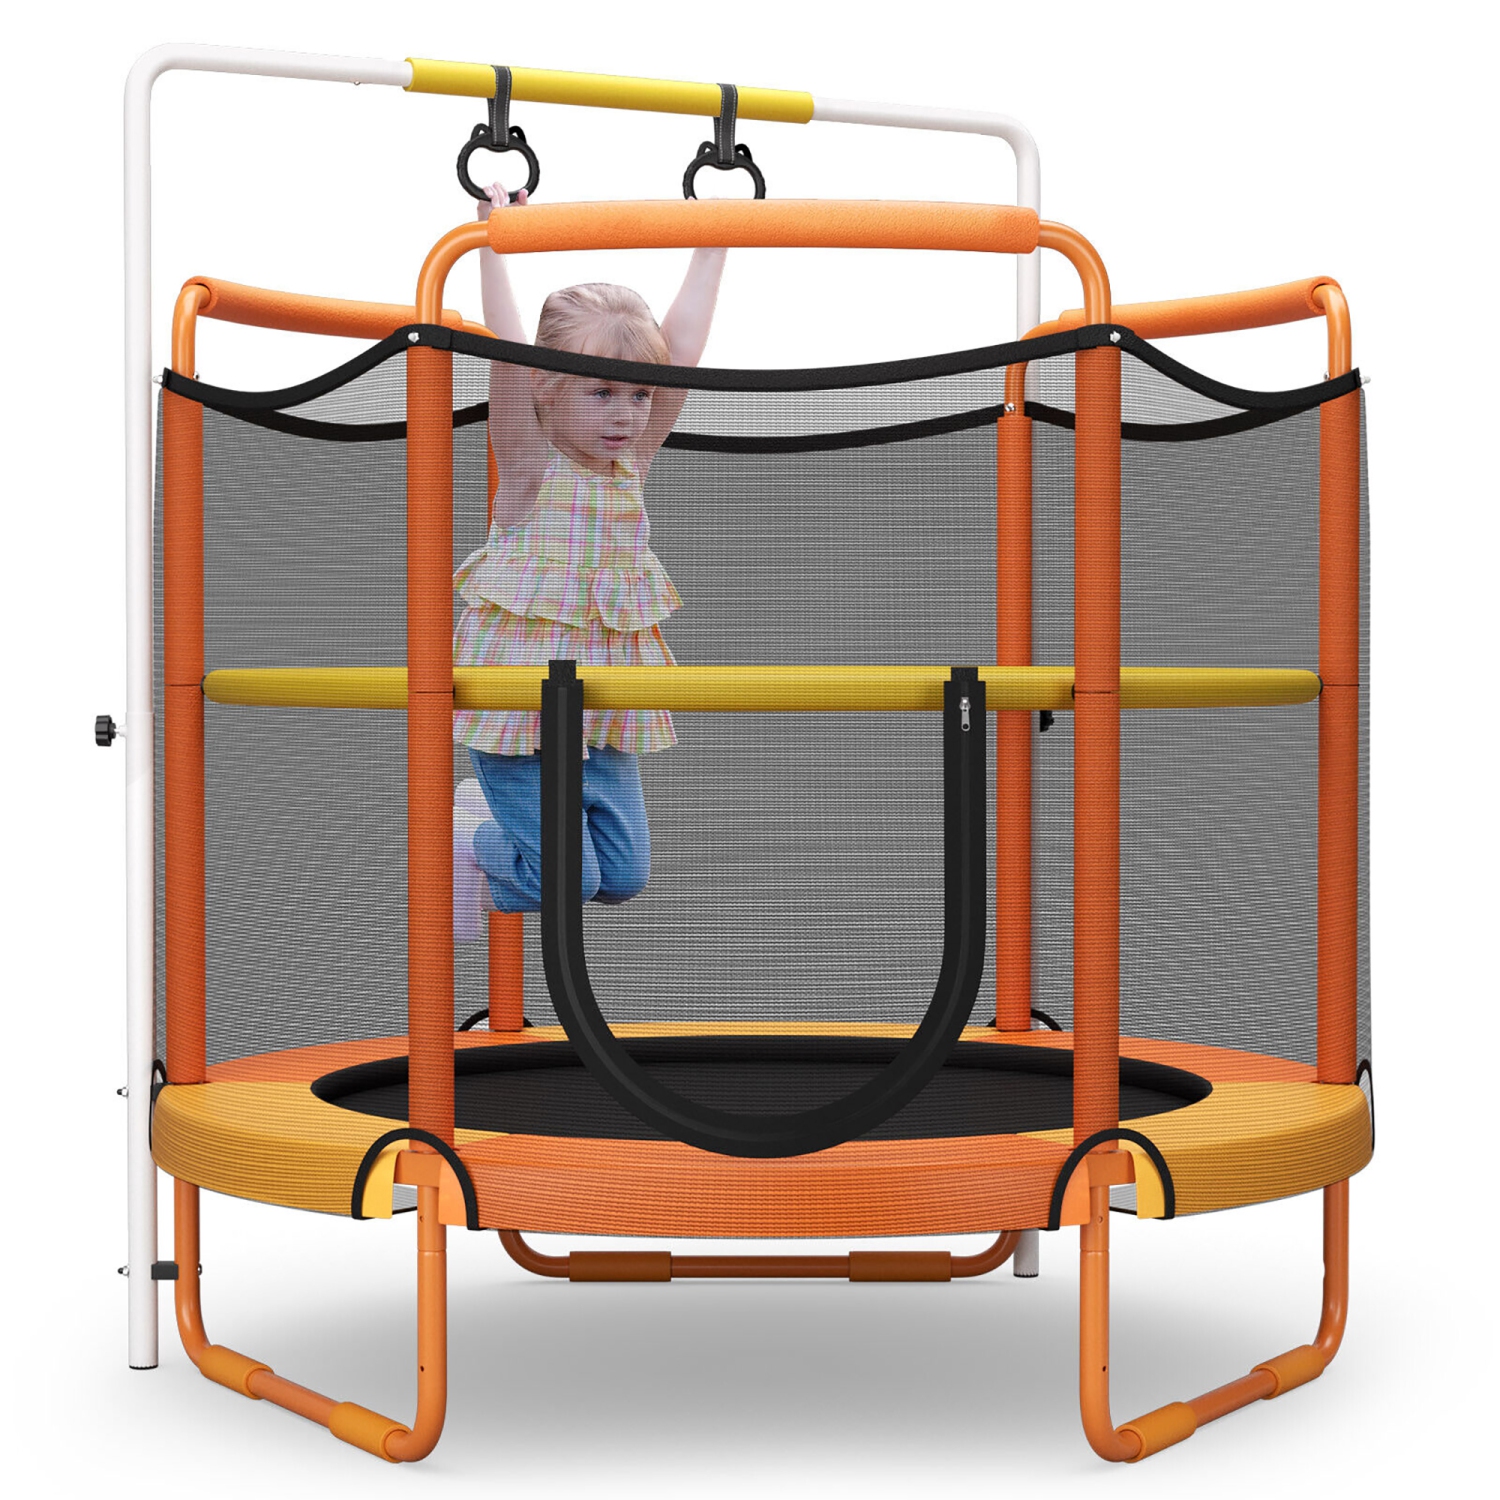 Gymax 5FT Kids 3-in-1 Game Trampoline Seamless W/ Enclosure Net Spring Pad In/ Outdoor